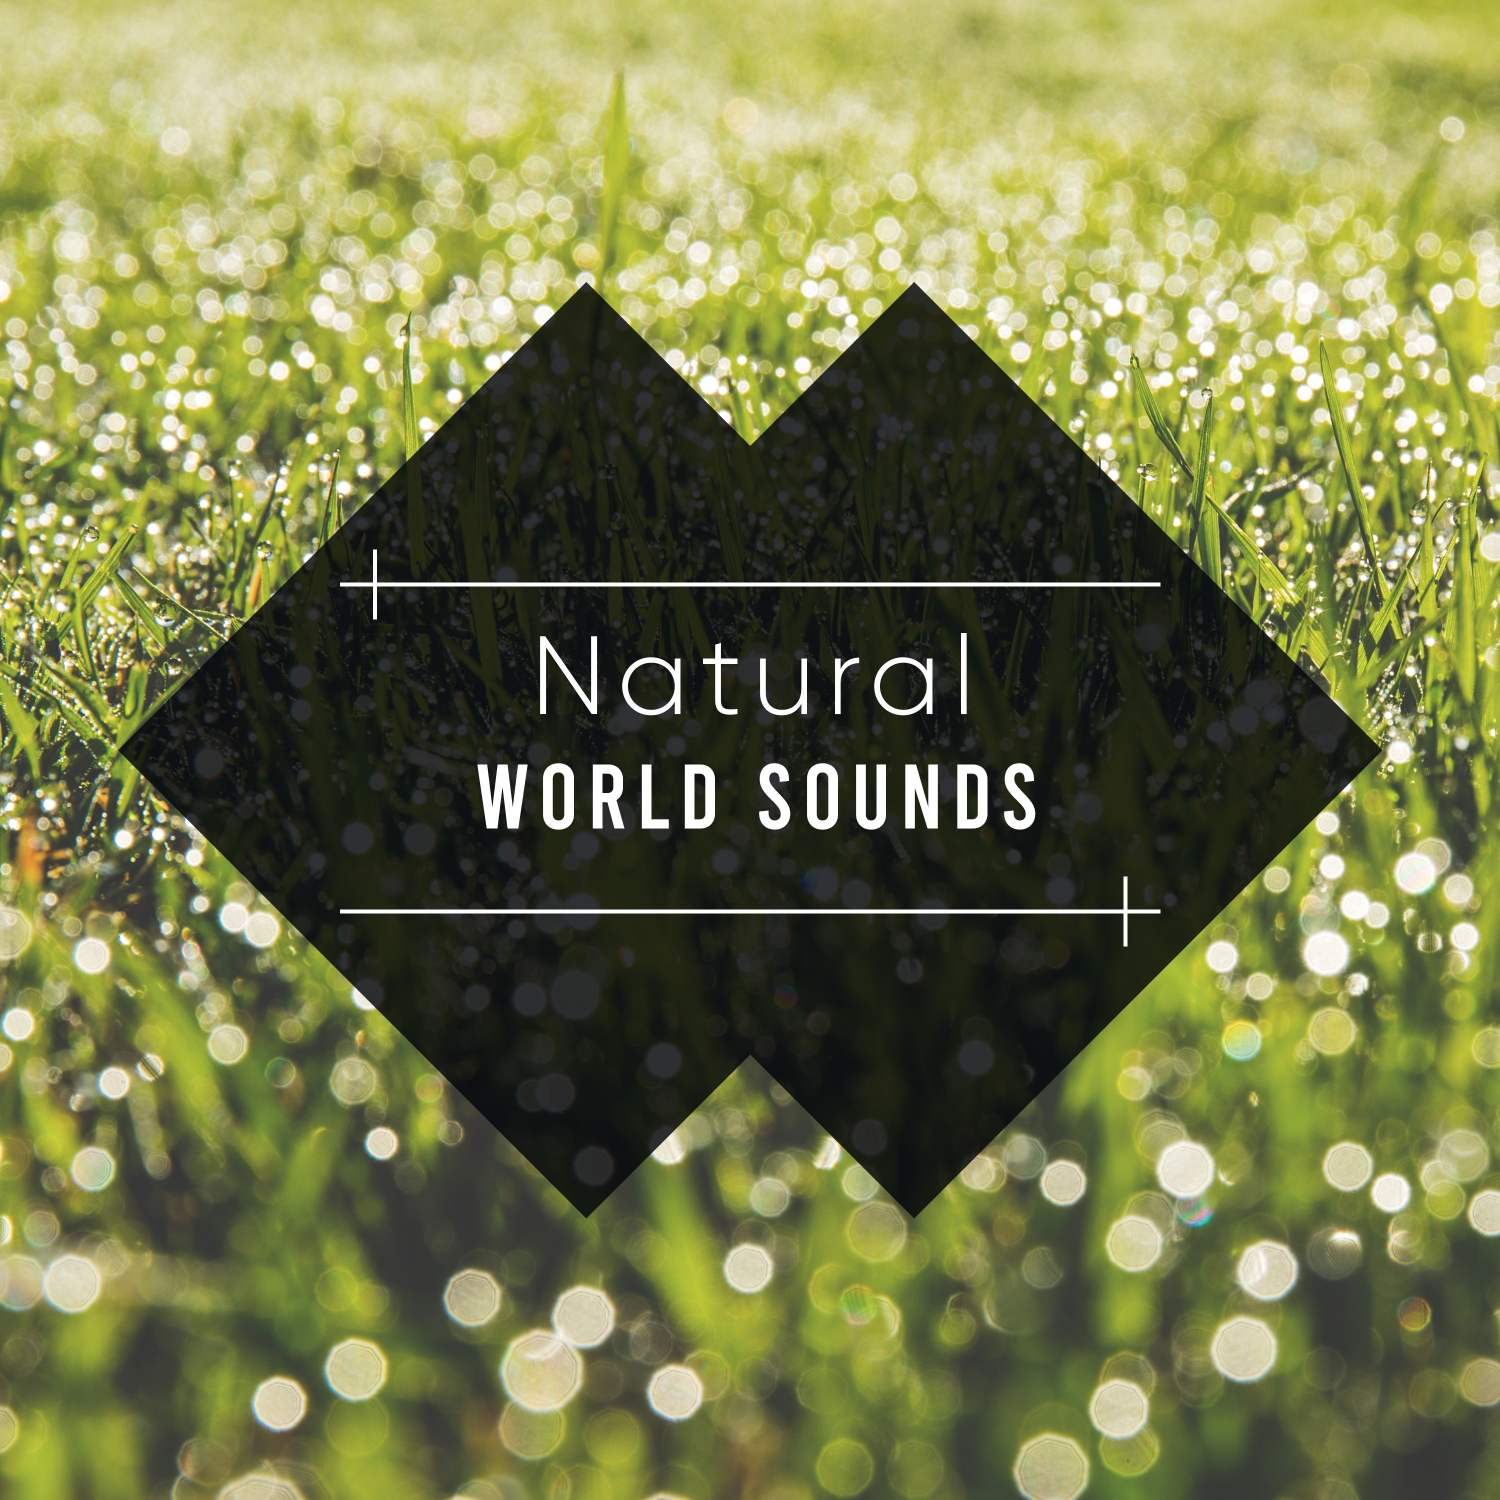 16 Natural World Sounds: Rain & Heavy Thunderstorms